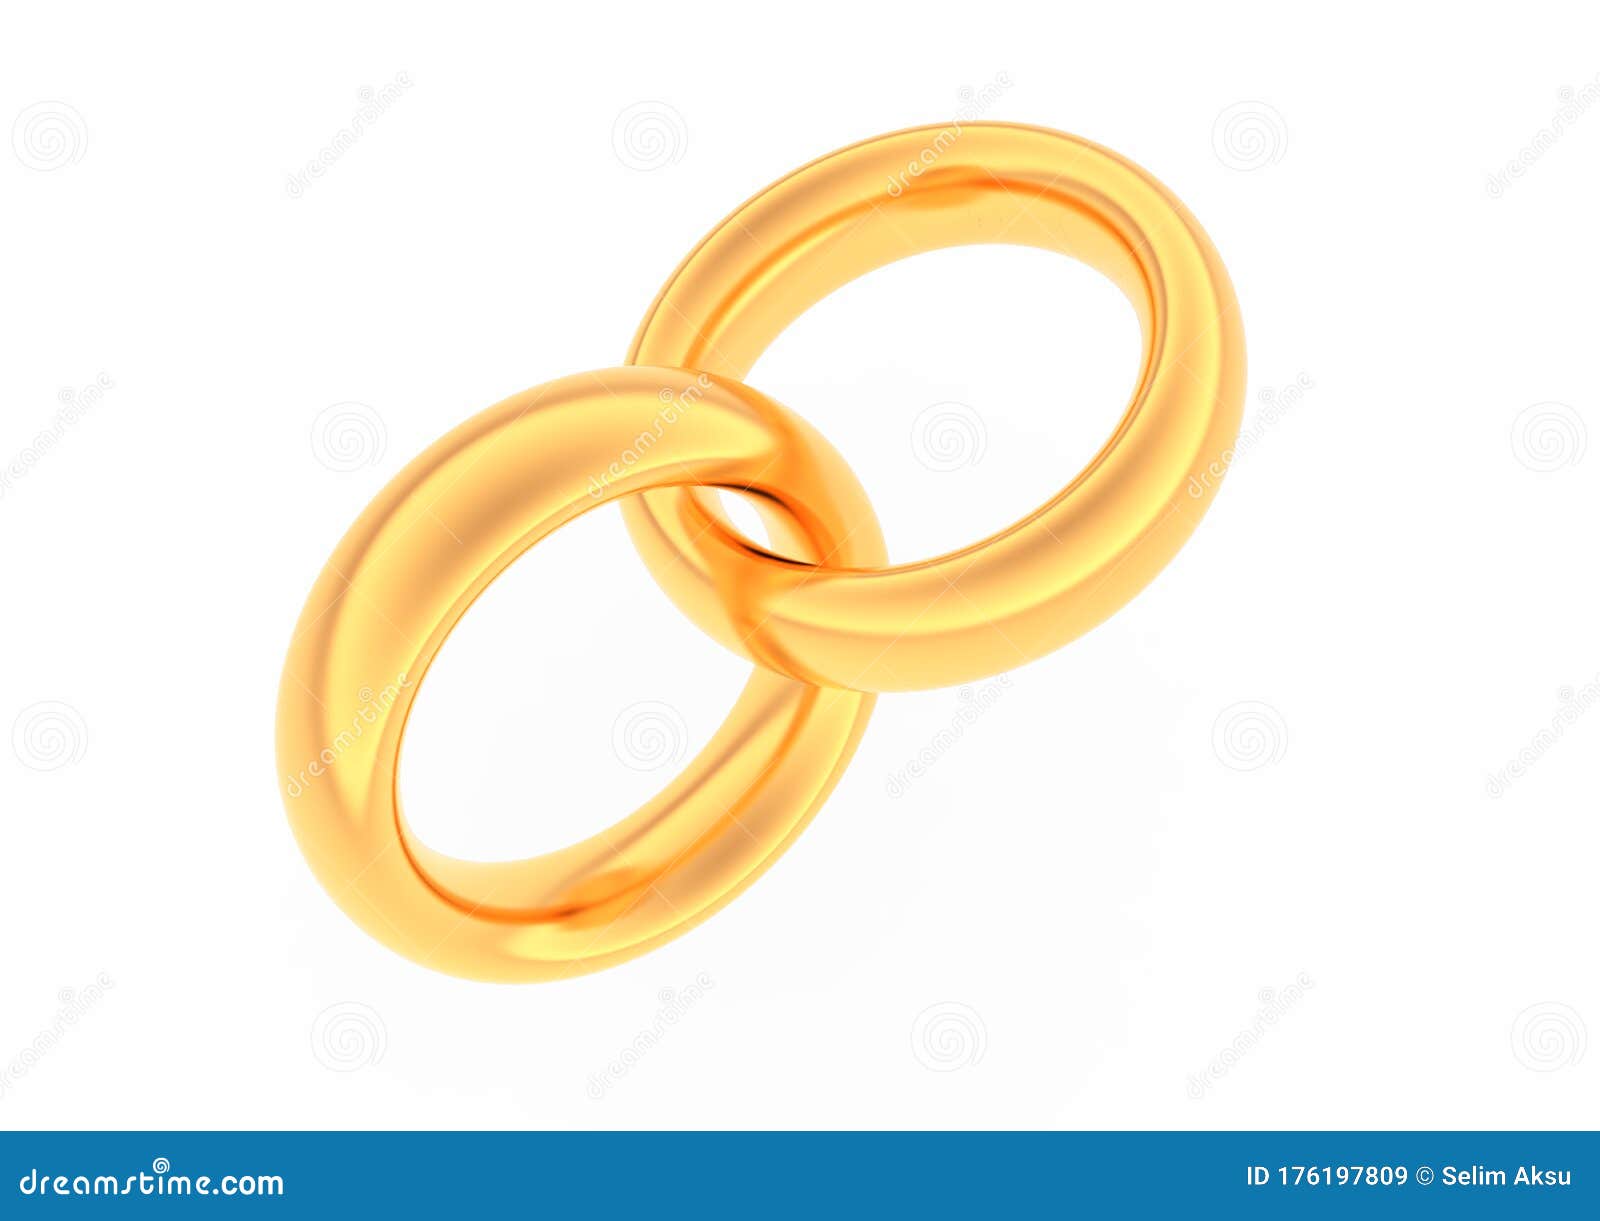 Download Two Intertwined Gold Wedding Rings. Stock Illustration ...